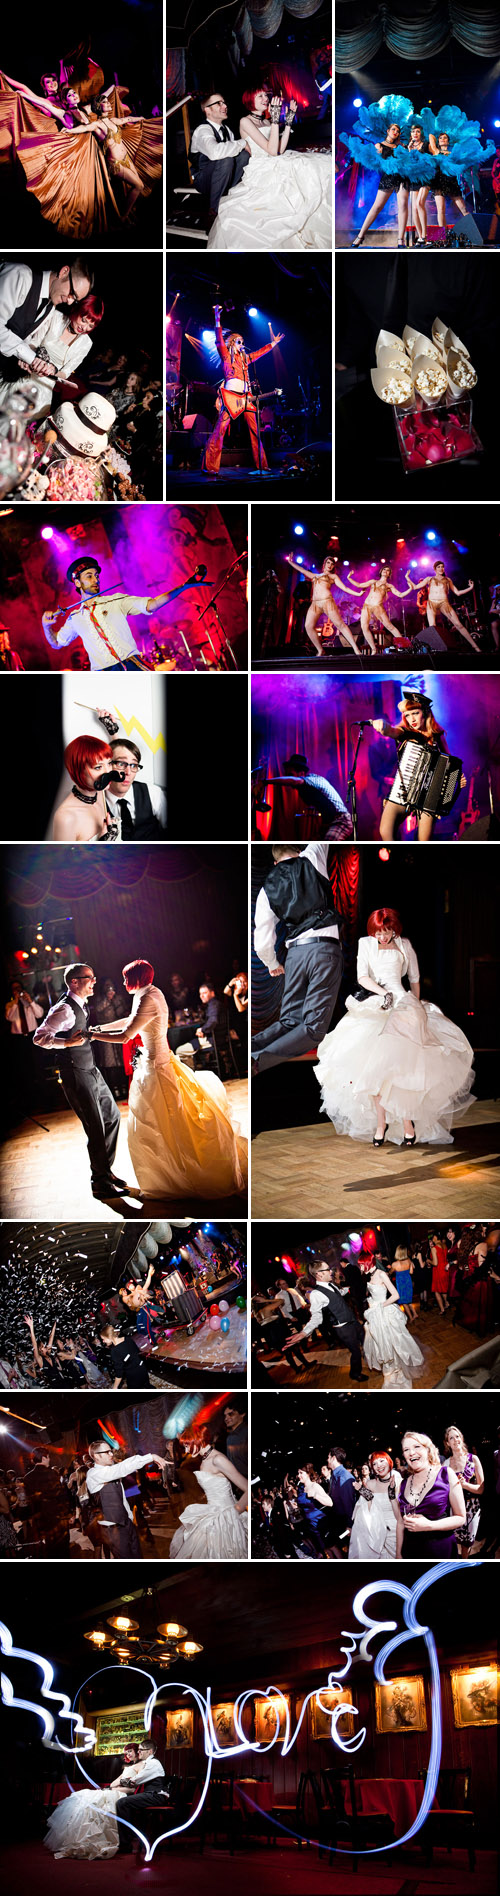 Vaudeville and burlesque inspired wedding at Bimbo's 365 Club in San Francisco, California, photographed by Jules Bianchi